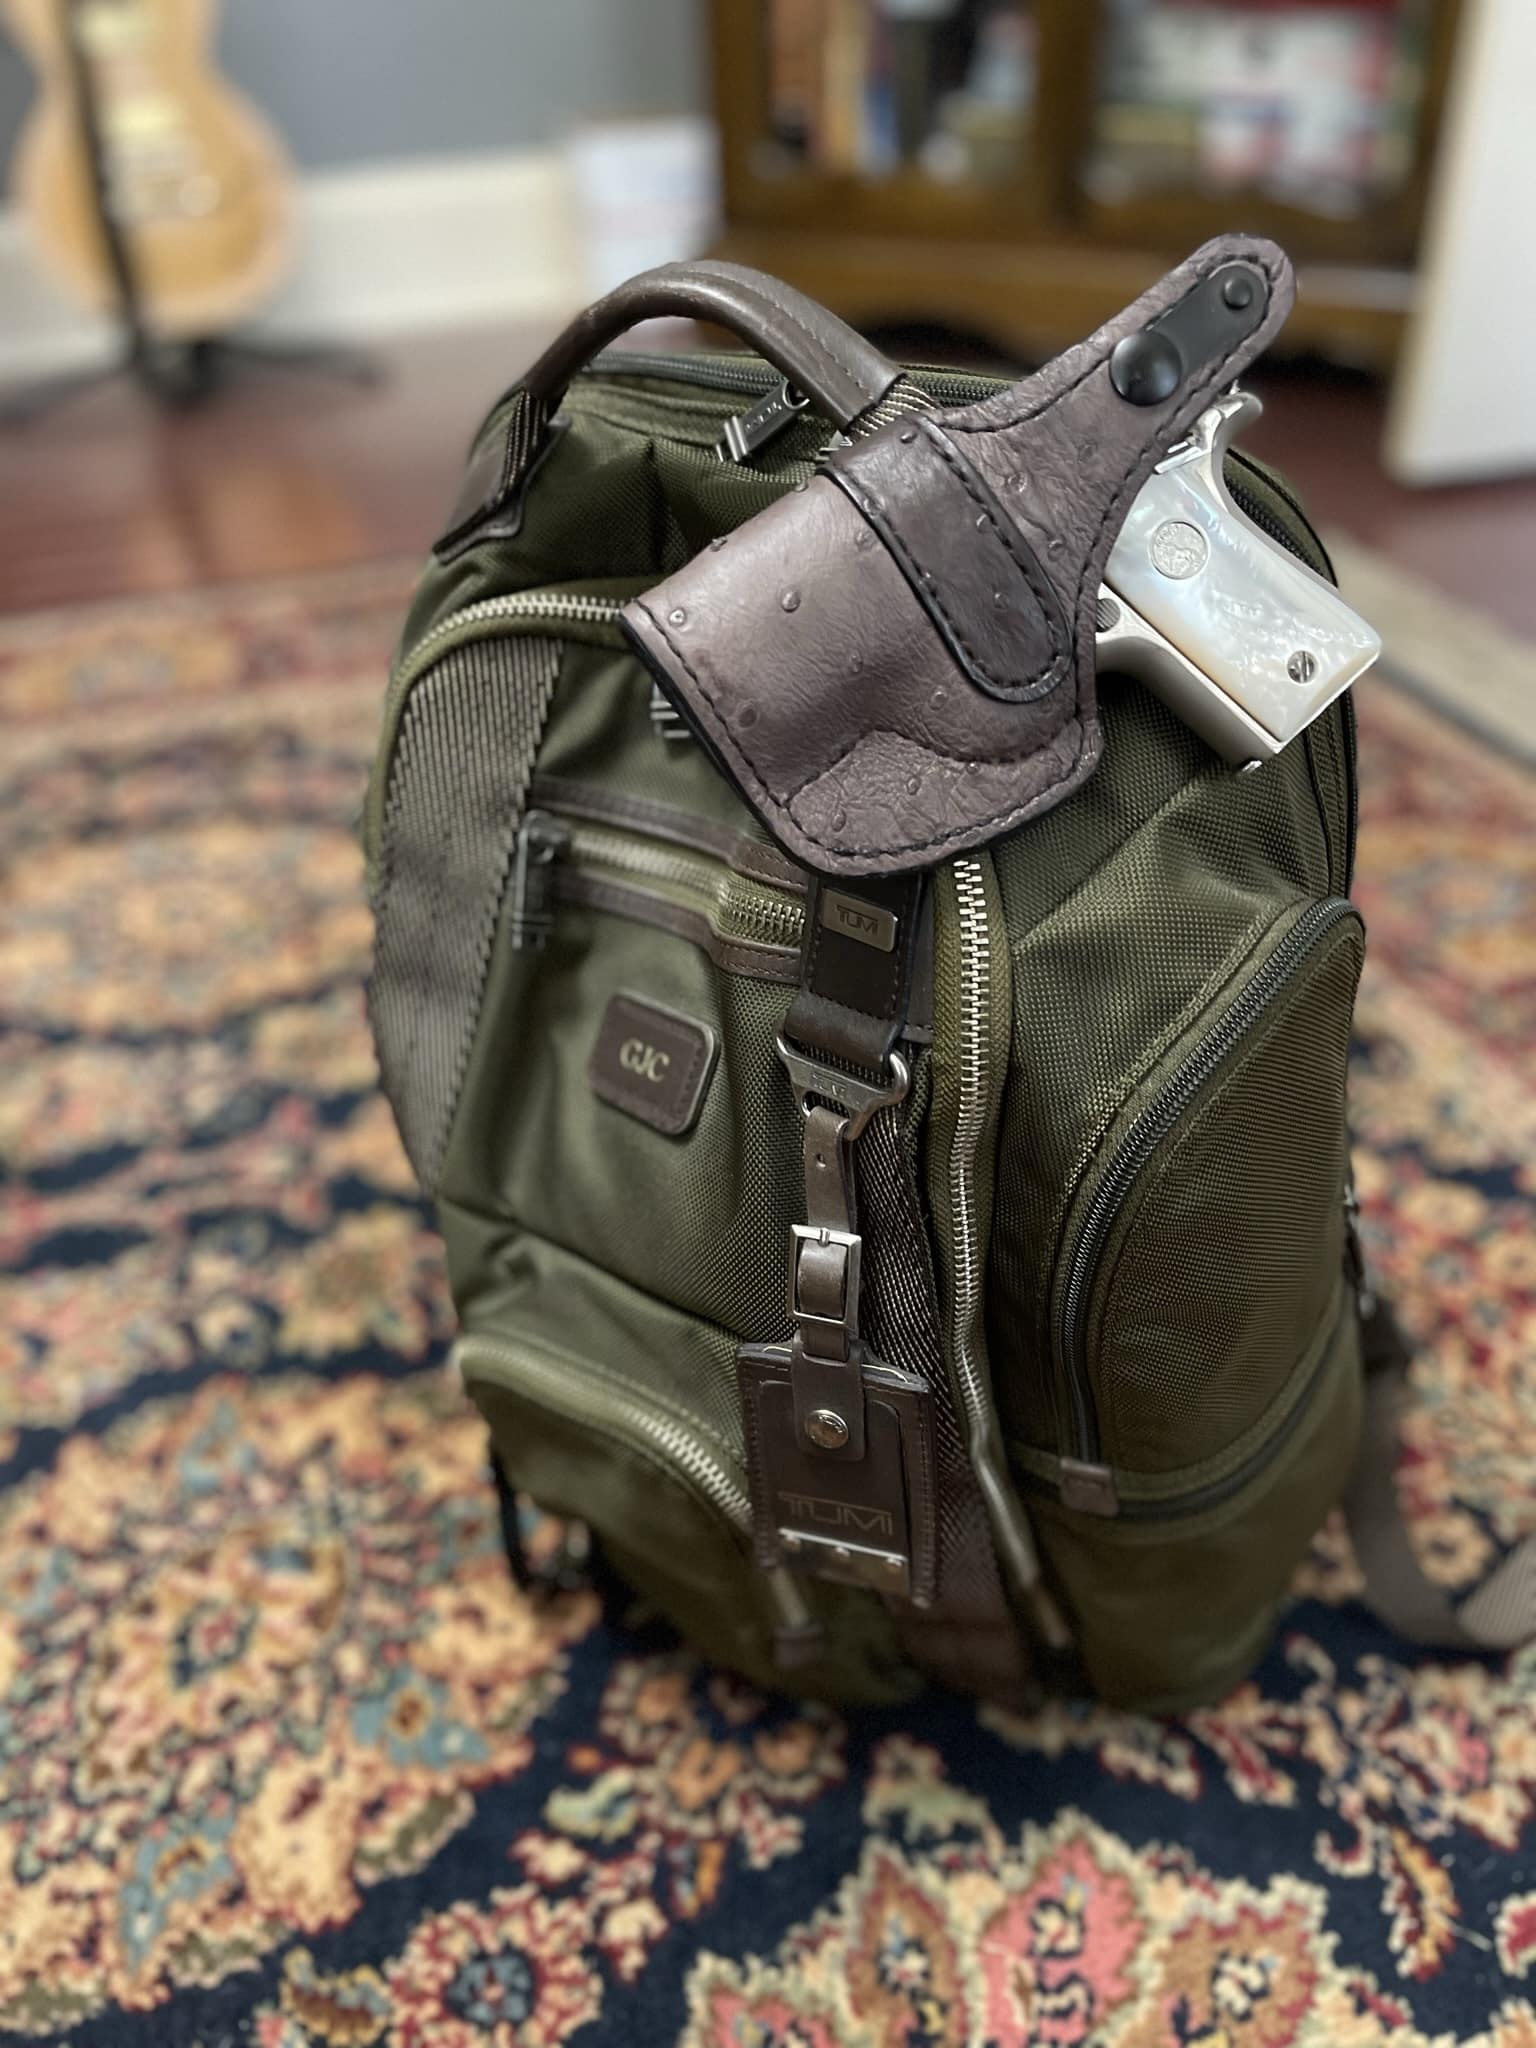 colt handgun attached to backpack